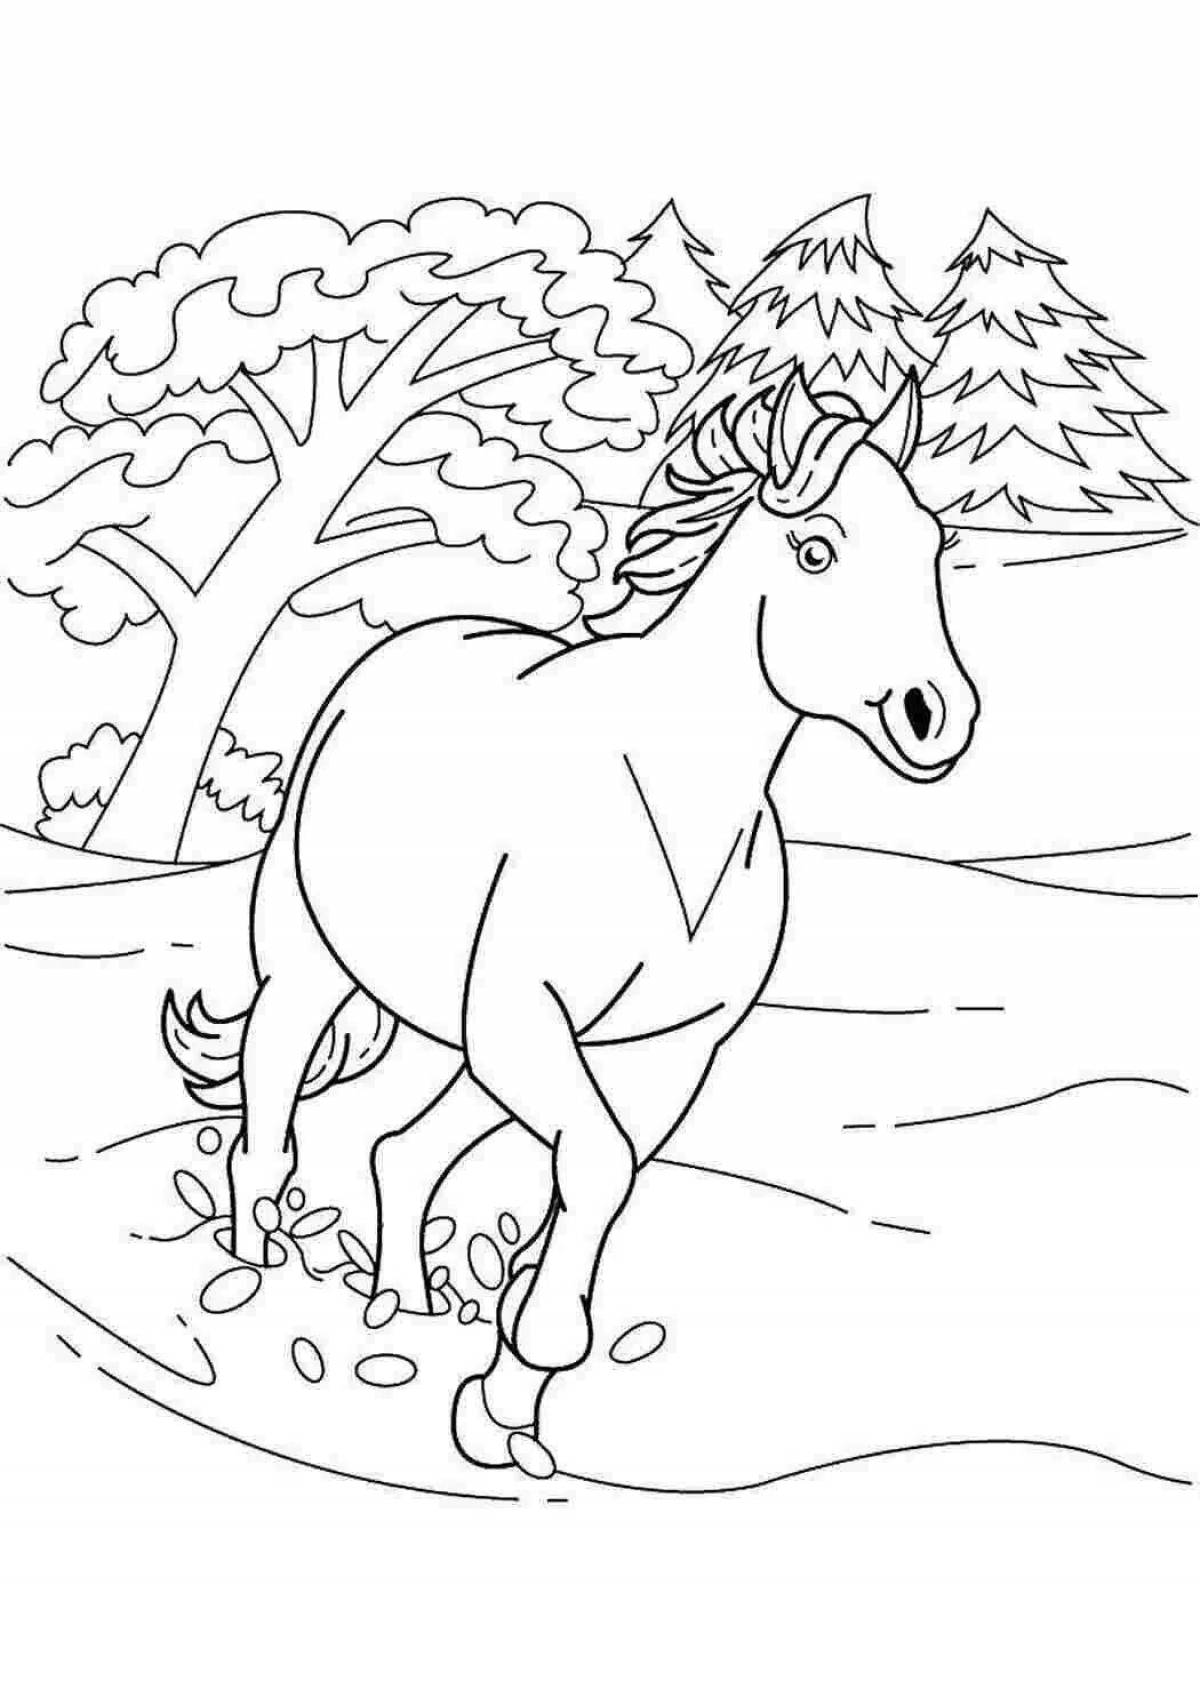 Coloring page magnificent winter horses